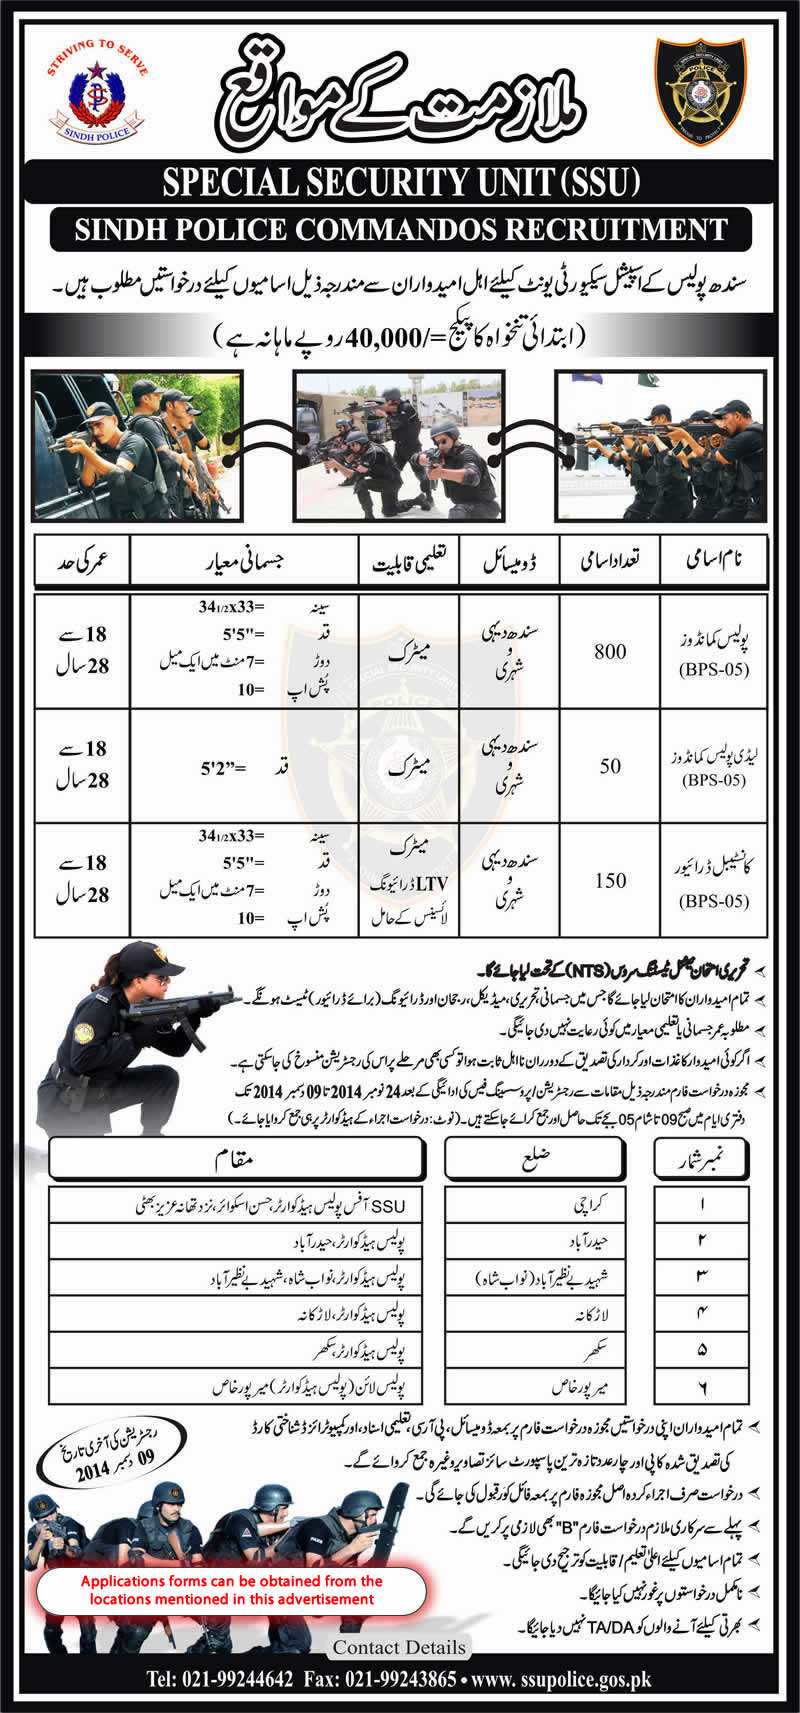 Sindh Police Special Security Unit Jobs November 2014 NTS Application Form Information